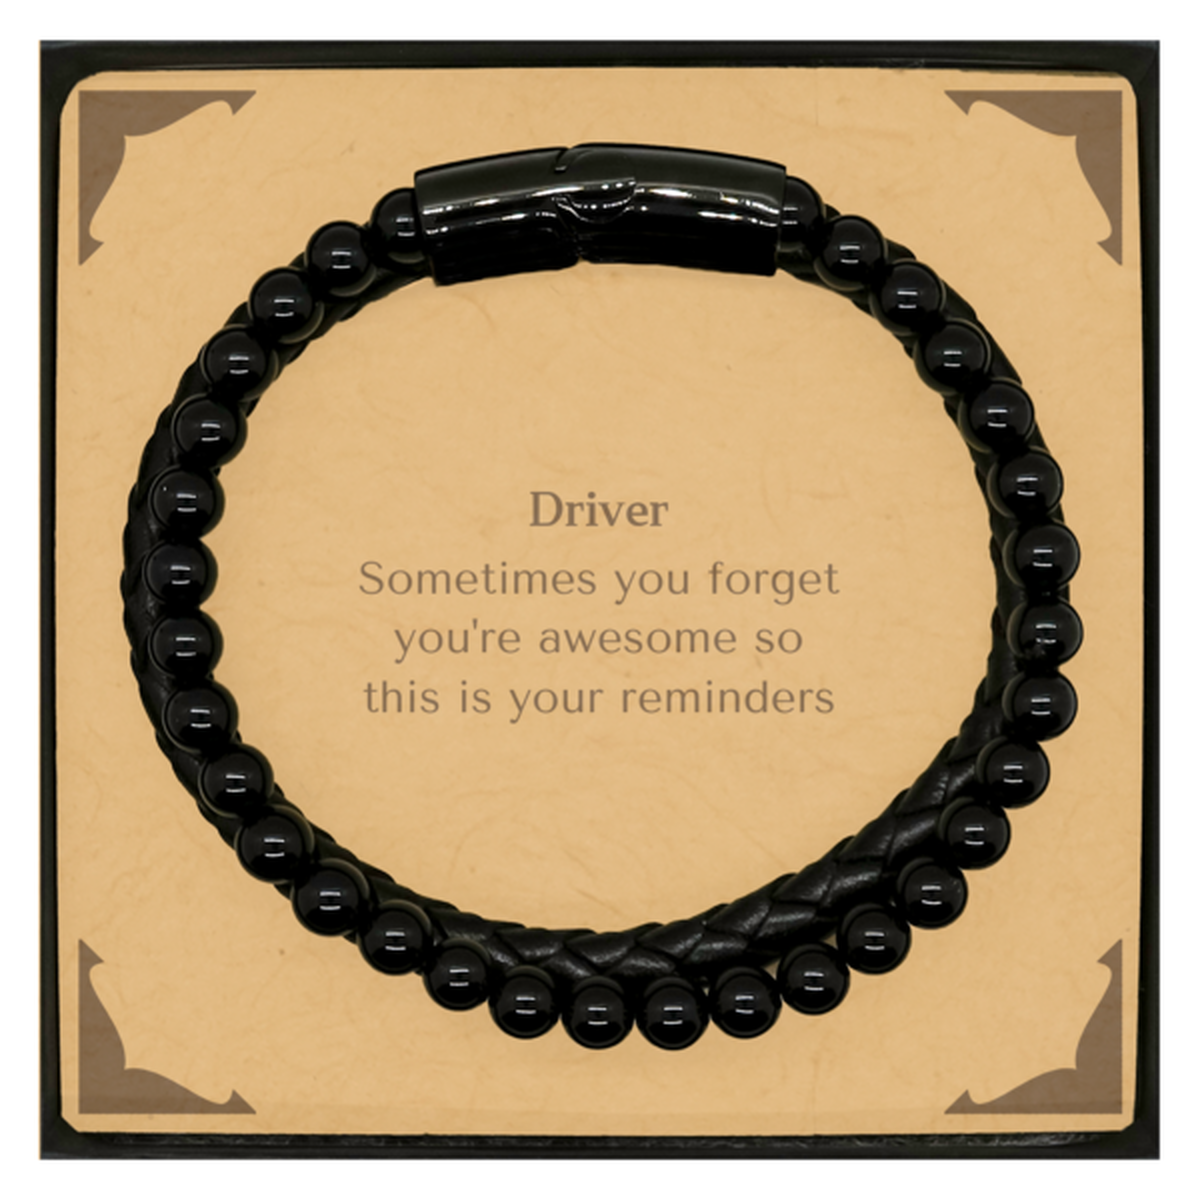 Sentimental Driver Stone Leather Bracelets, Driver Sometimes you forget you're awesome so this is your reminders, Graduation Christmas Birthday Gifts for Driver, Men, Women, Coworkers